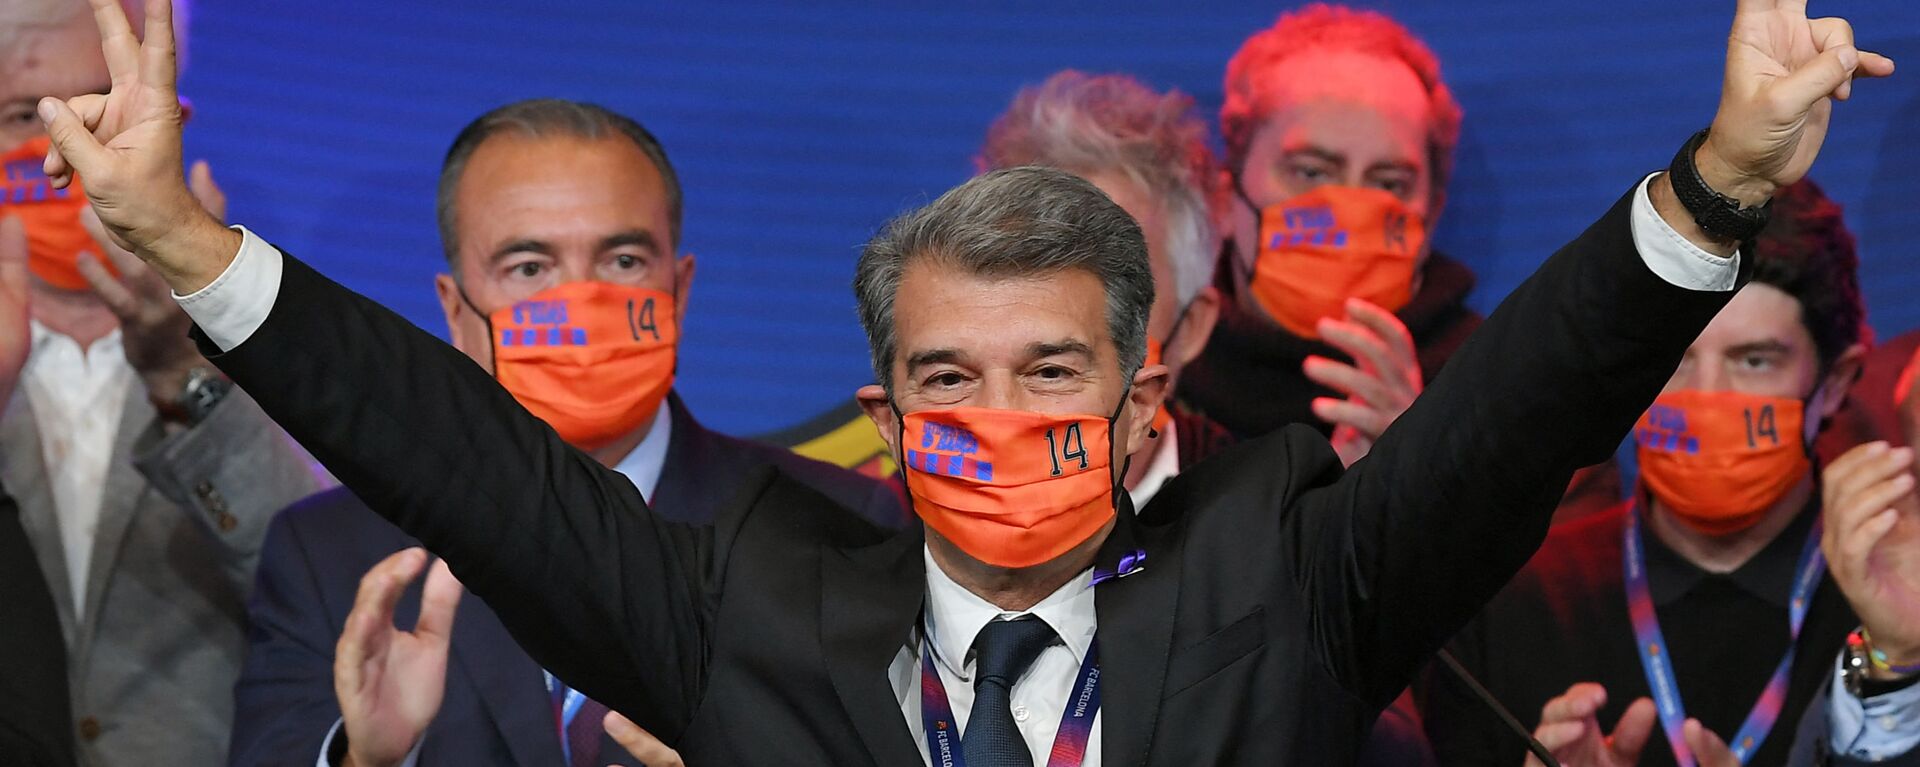 Spanish lawyer Joan Laporta celebrates his victory at the auditorium of the Camp Nou complex after winning the election for the FC Barcelona presidency on March 7, 2021 in Barcelona. - اسپوتنیک افغانستان  , 1920, 02.08.2021